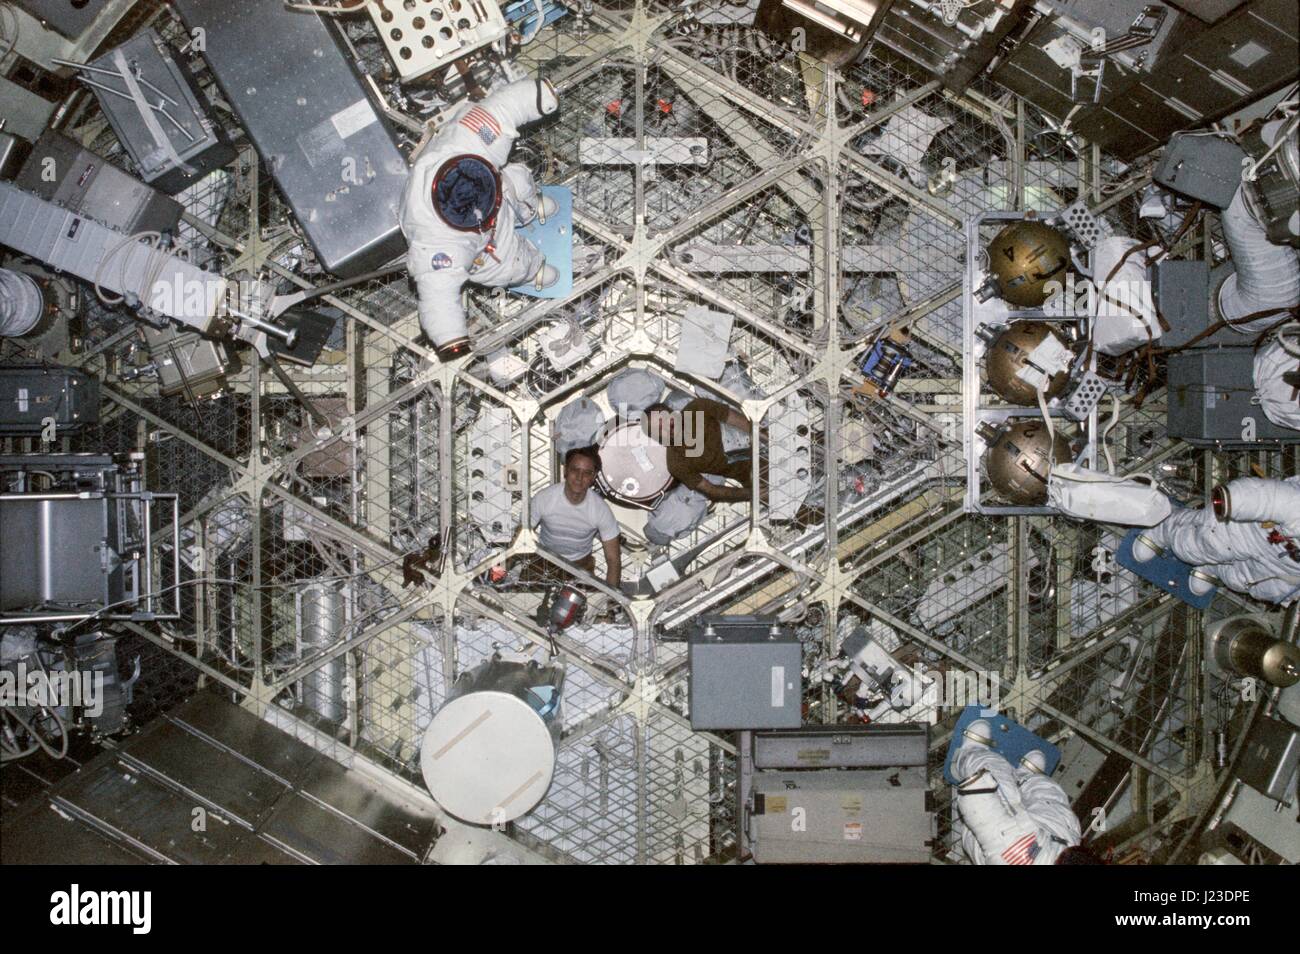 NASA astronauts Ed Gibson (left) and Jerry Carr look down from the passageway of the Skylab 4 space station command module Orbital Workshop February 1, 1974 while in Earth orbit.    (photo by NASA via Planetpix) Stock Photo